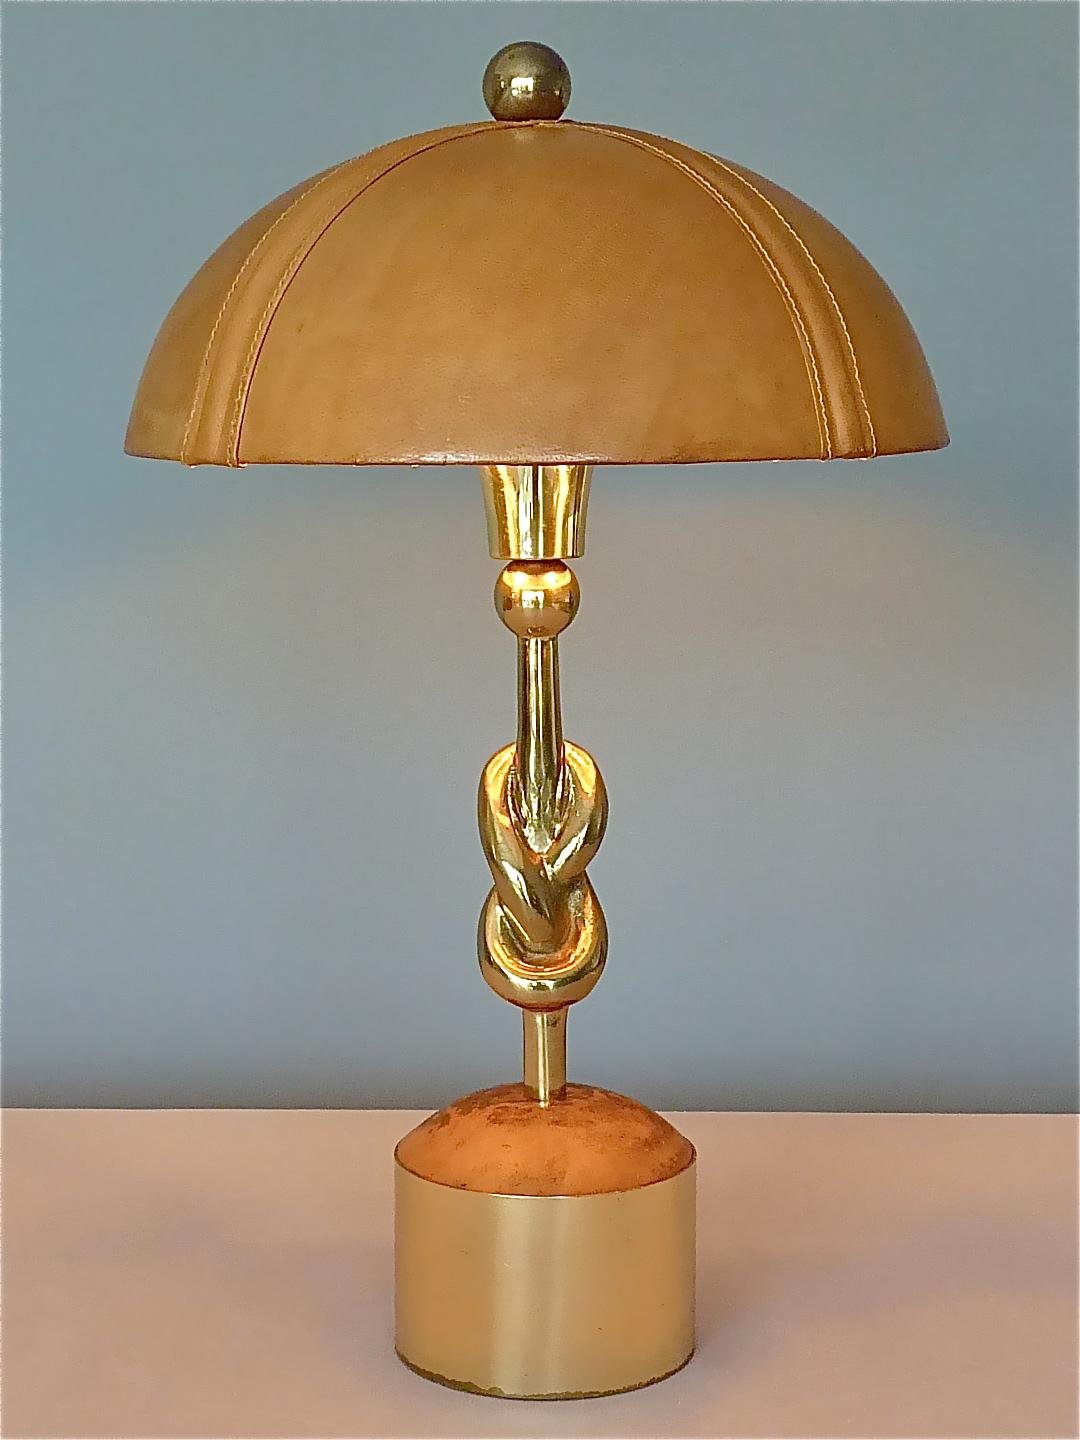 Sculptural Gilt Bronze Leather Knotted Table Lamp French 1970s Jansen Pergay Era For Sale 13